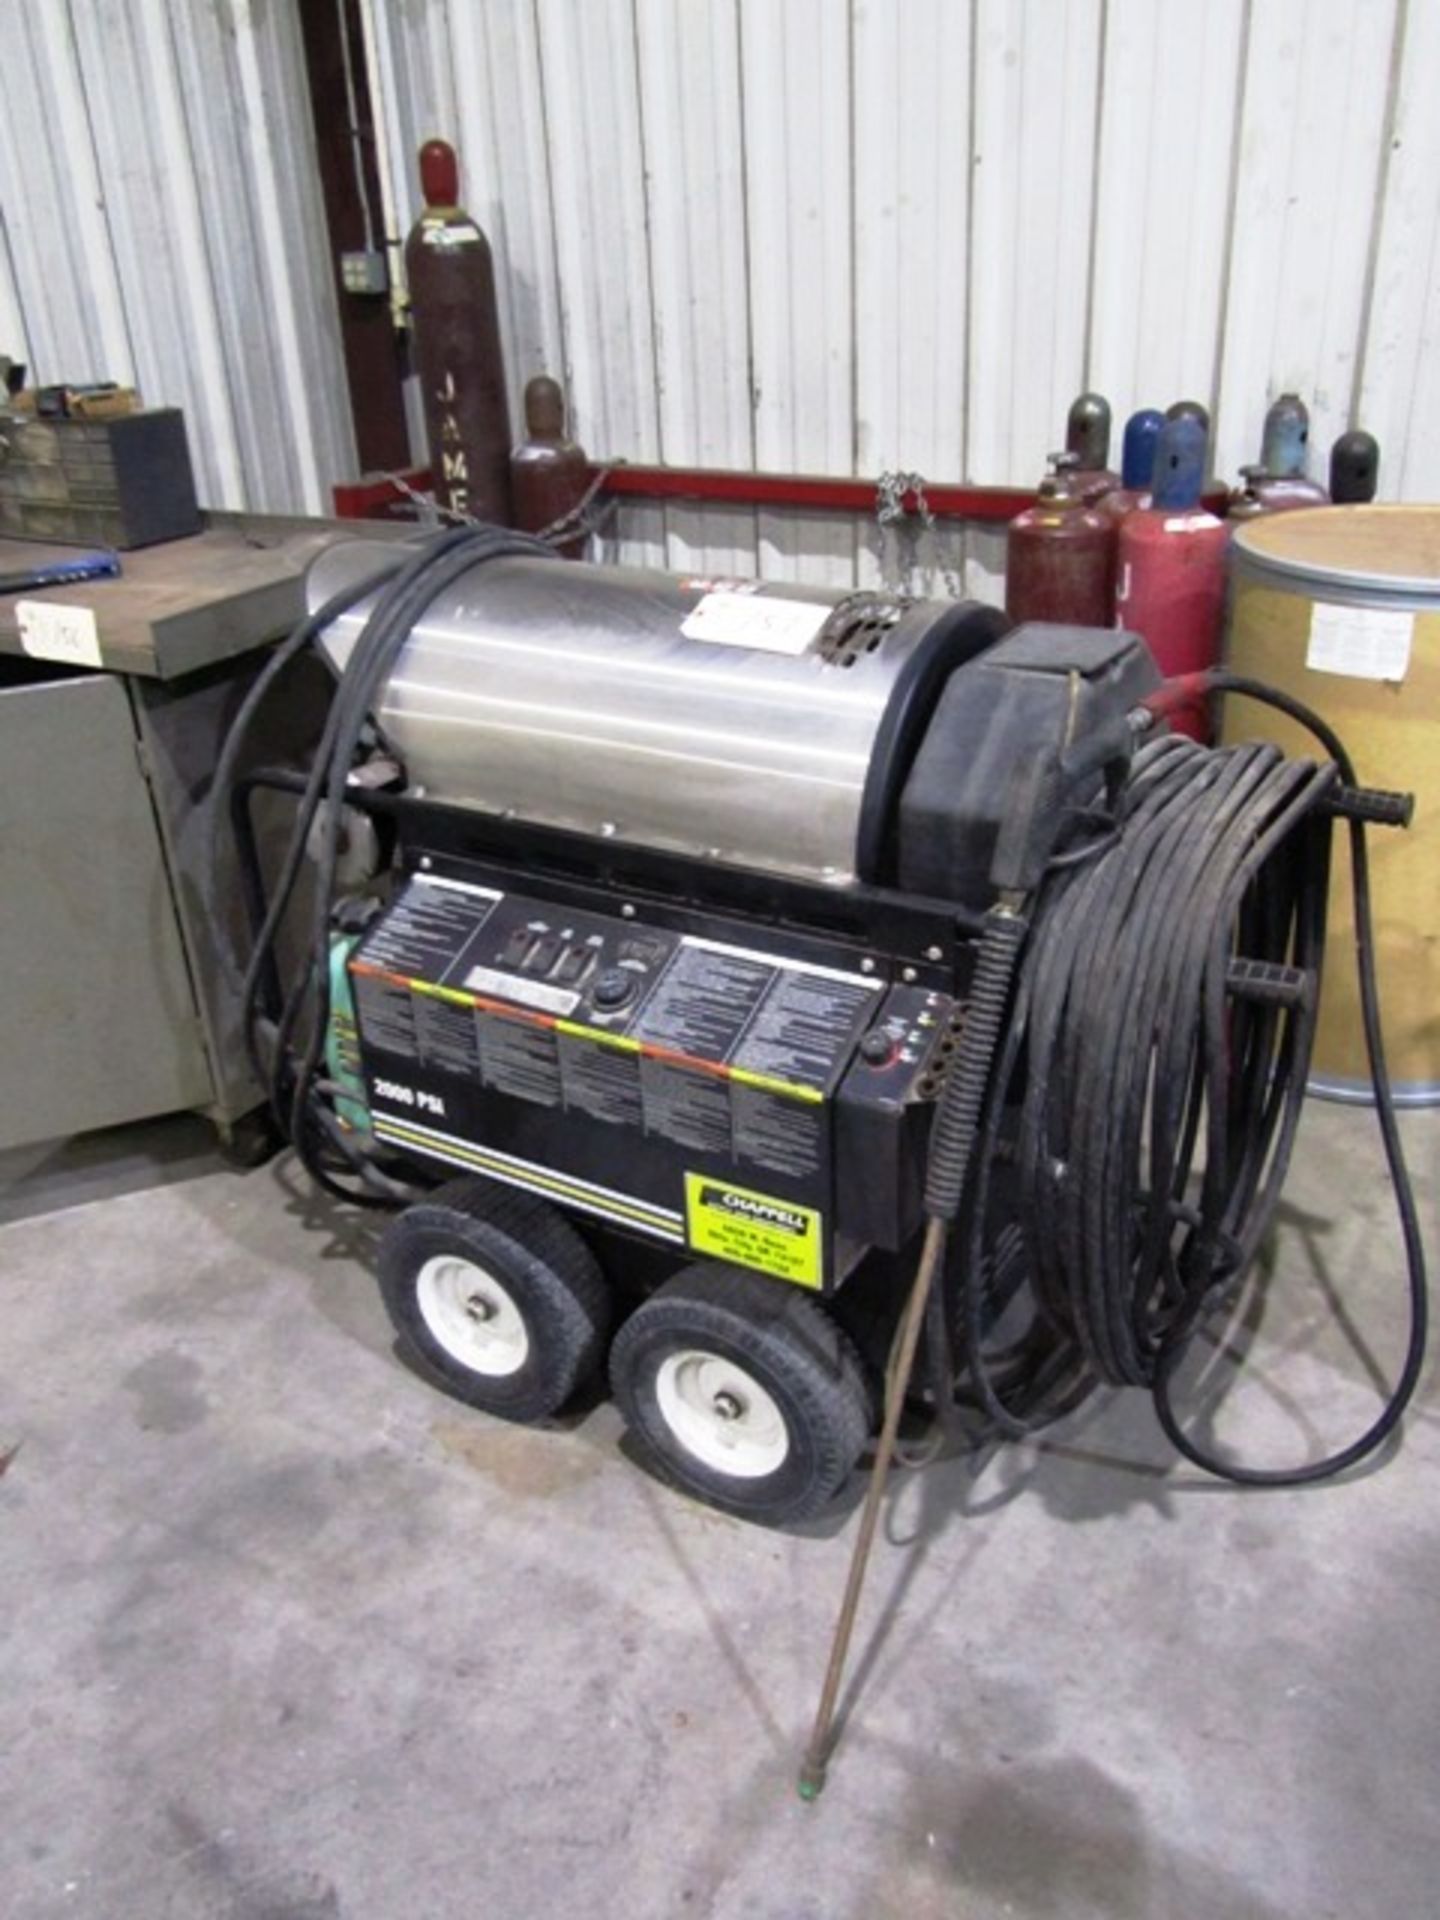 Chappelle 2000 PSI Portable Pressure Washer with Temp Control